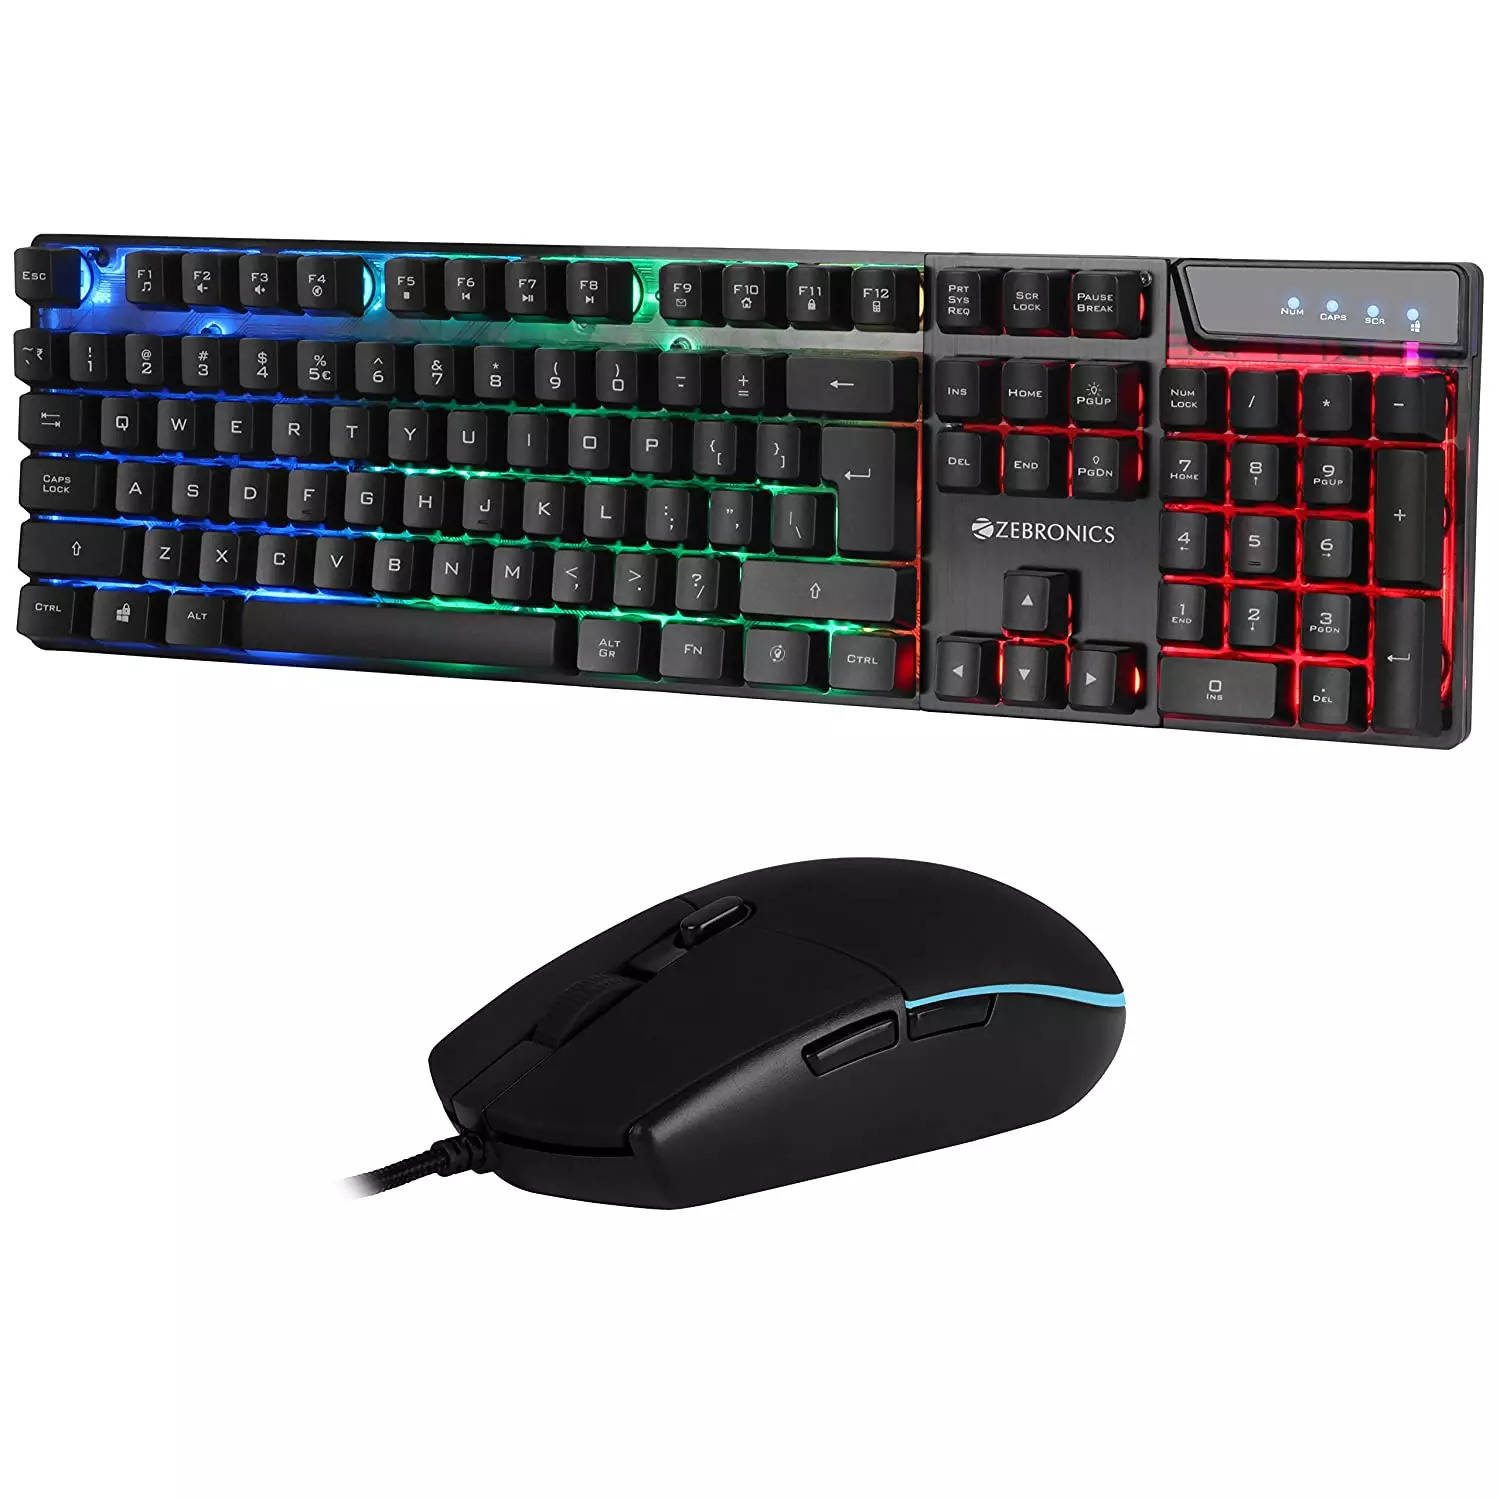 Best Gaming Keyboards Under 1000: 10 Best Gaming Keyboards Under 1000 in  India Starting at Rs. 439 - The Economic Times